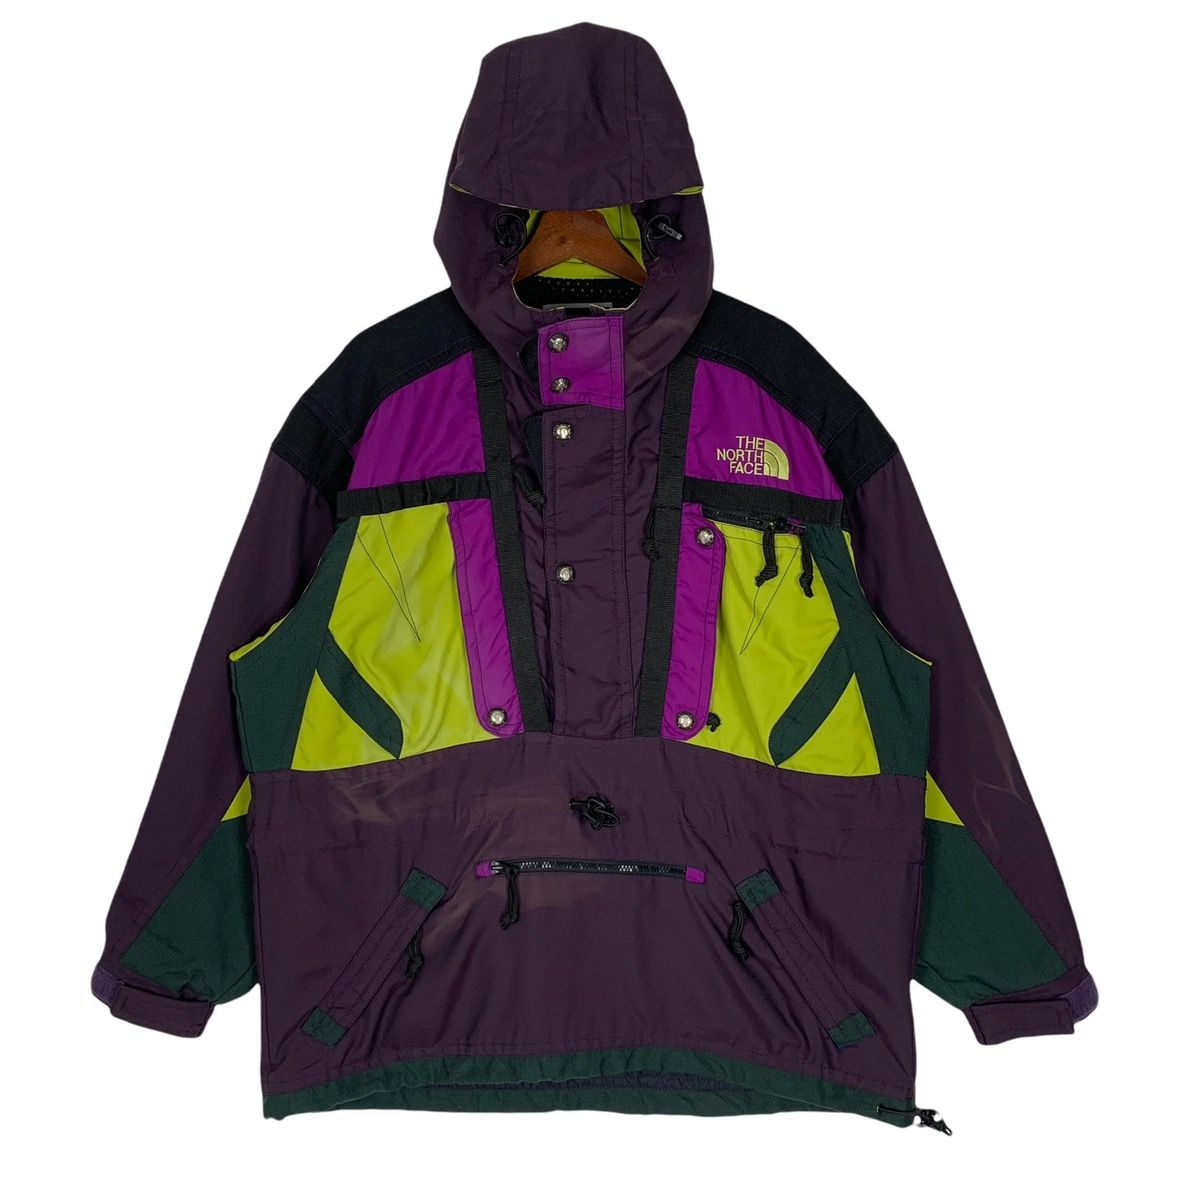 The North Face Color Block Winter Jacket - 1